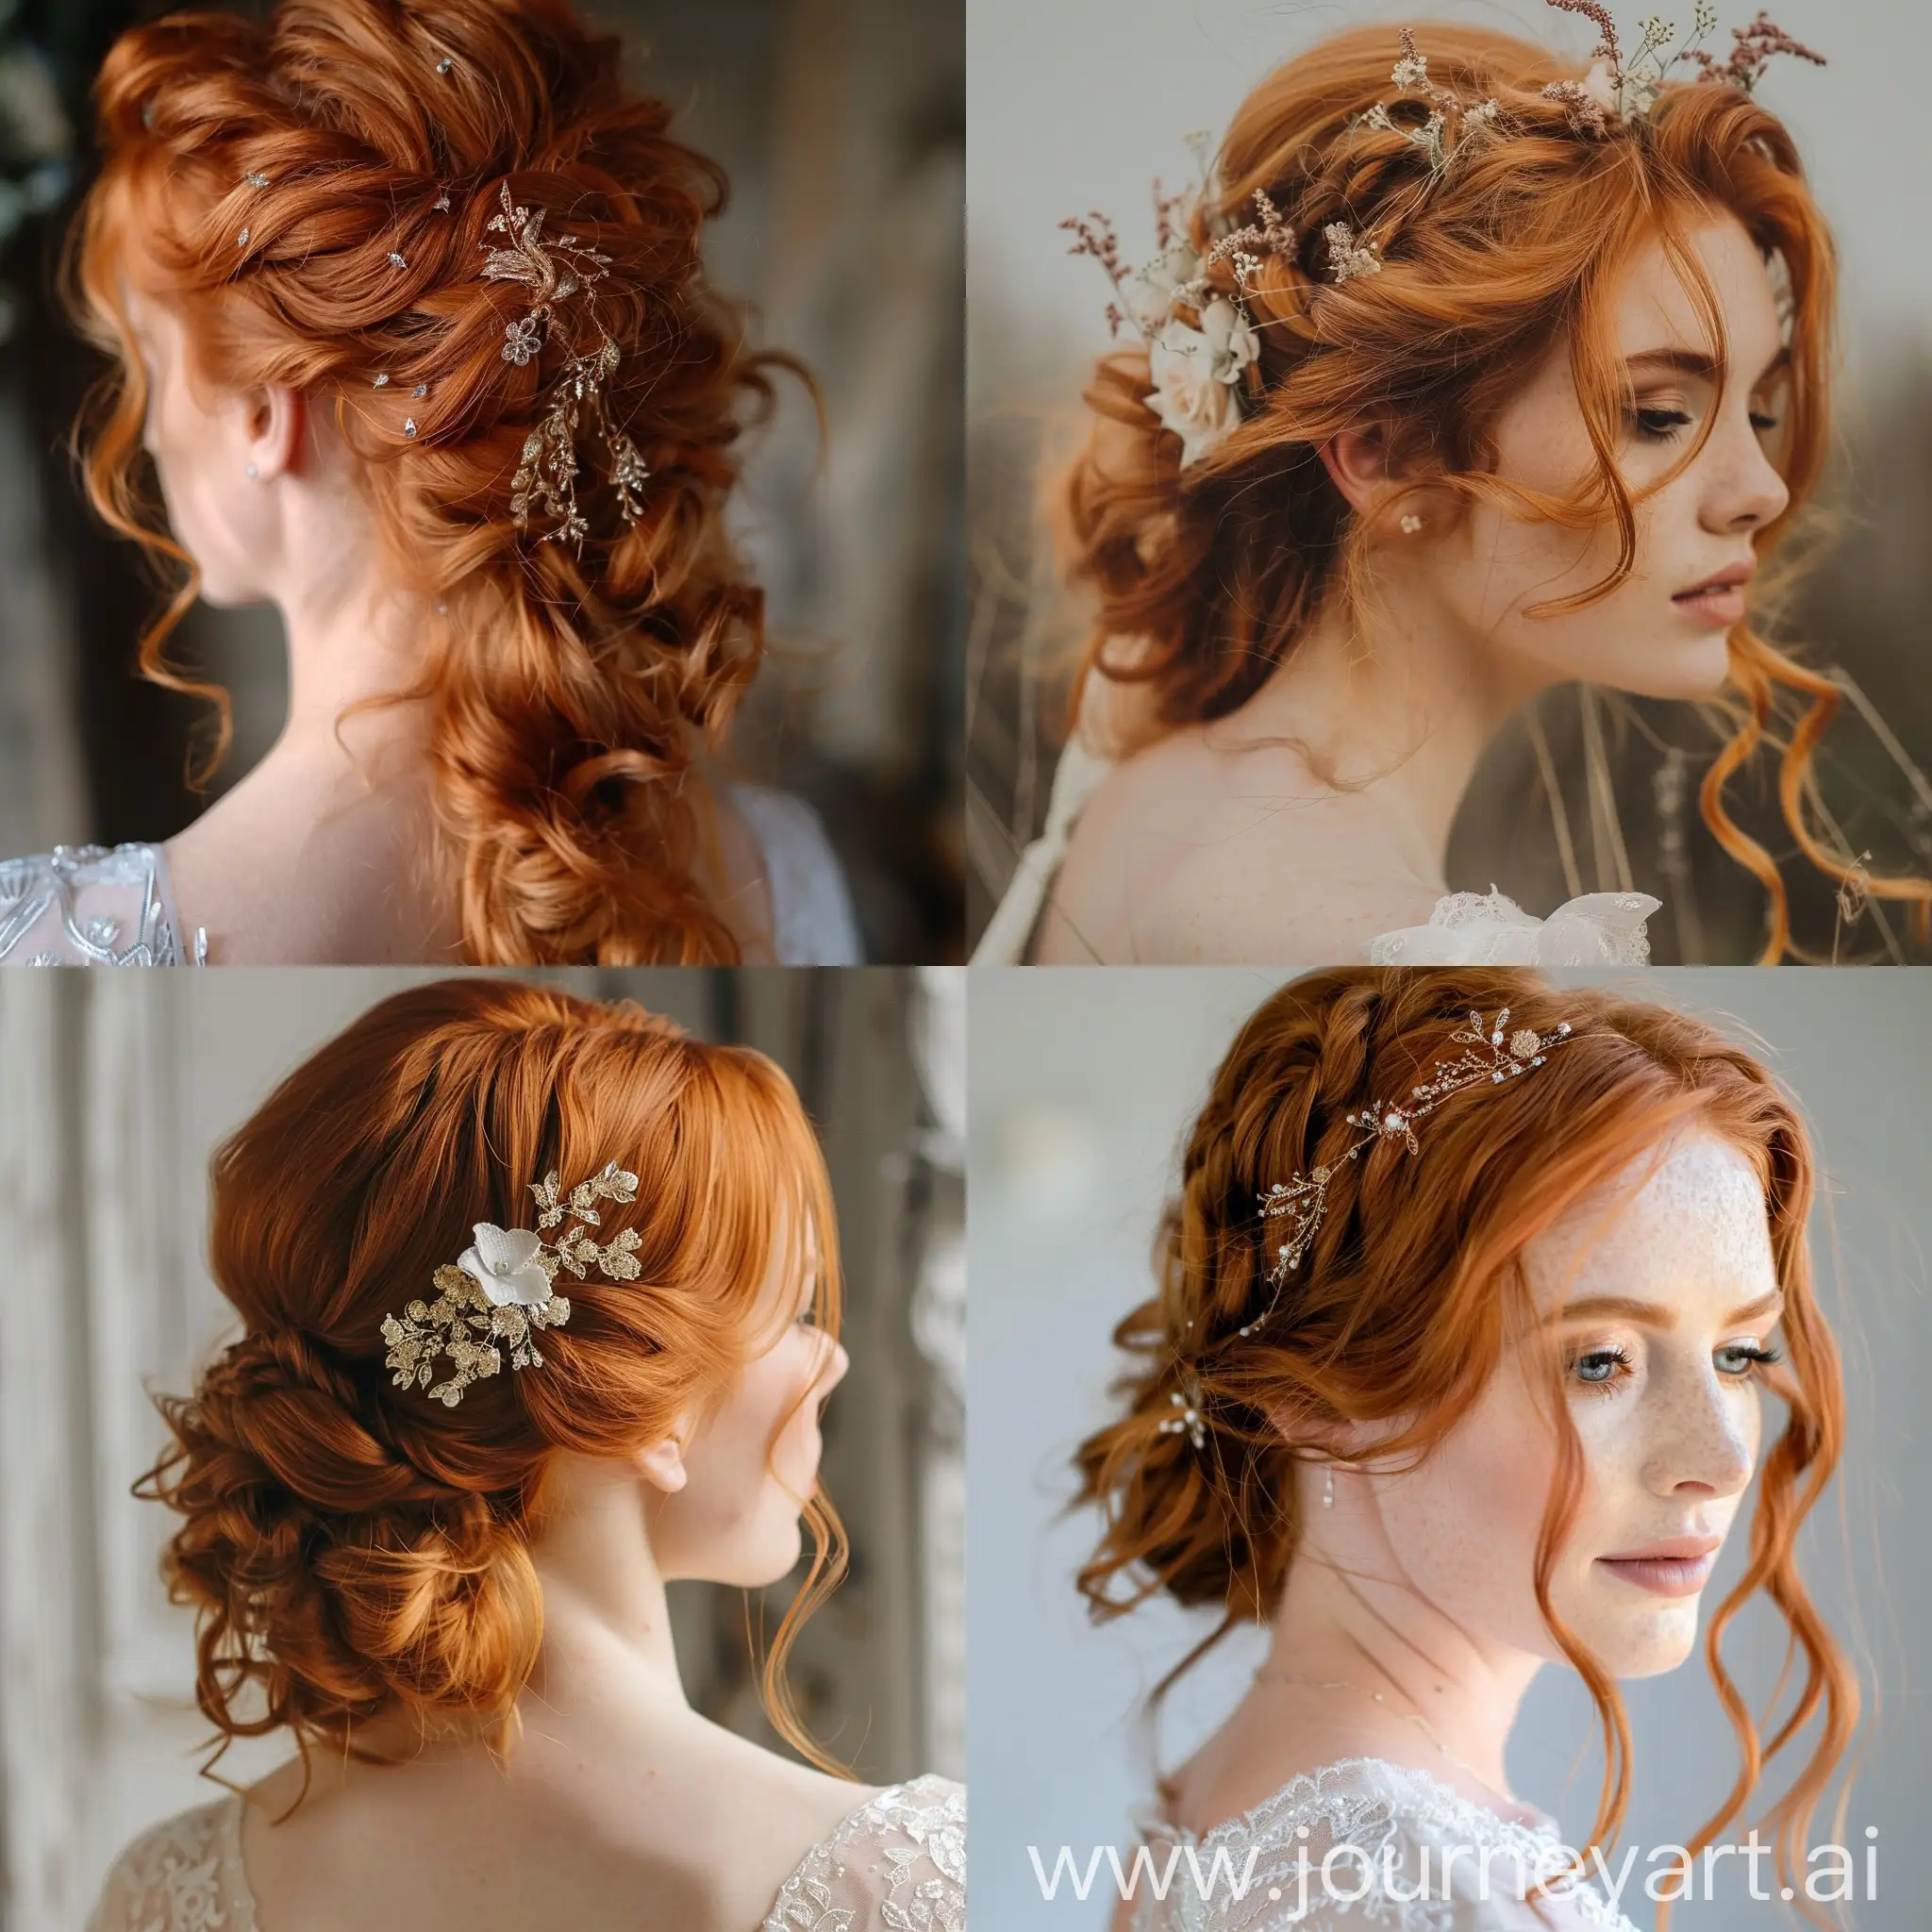 RedHaired-Bride-with-Elaborate-Wedding-Hairstyle